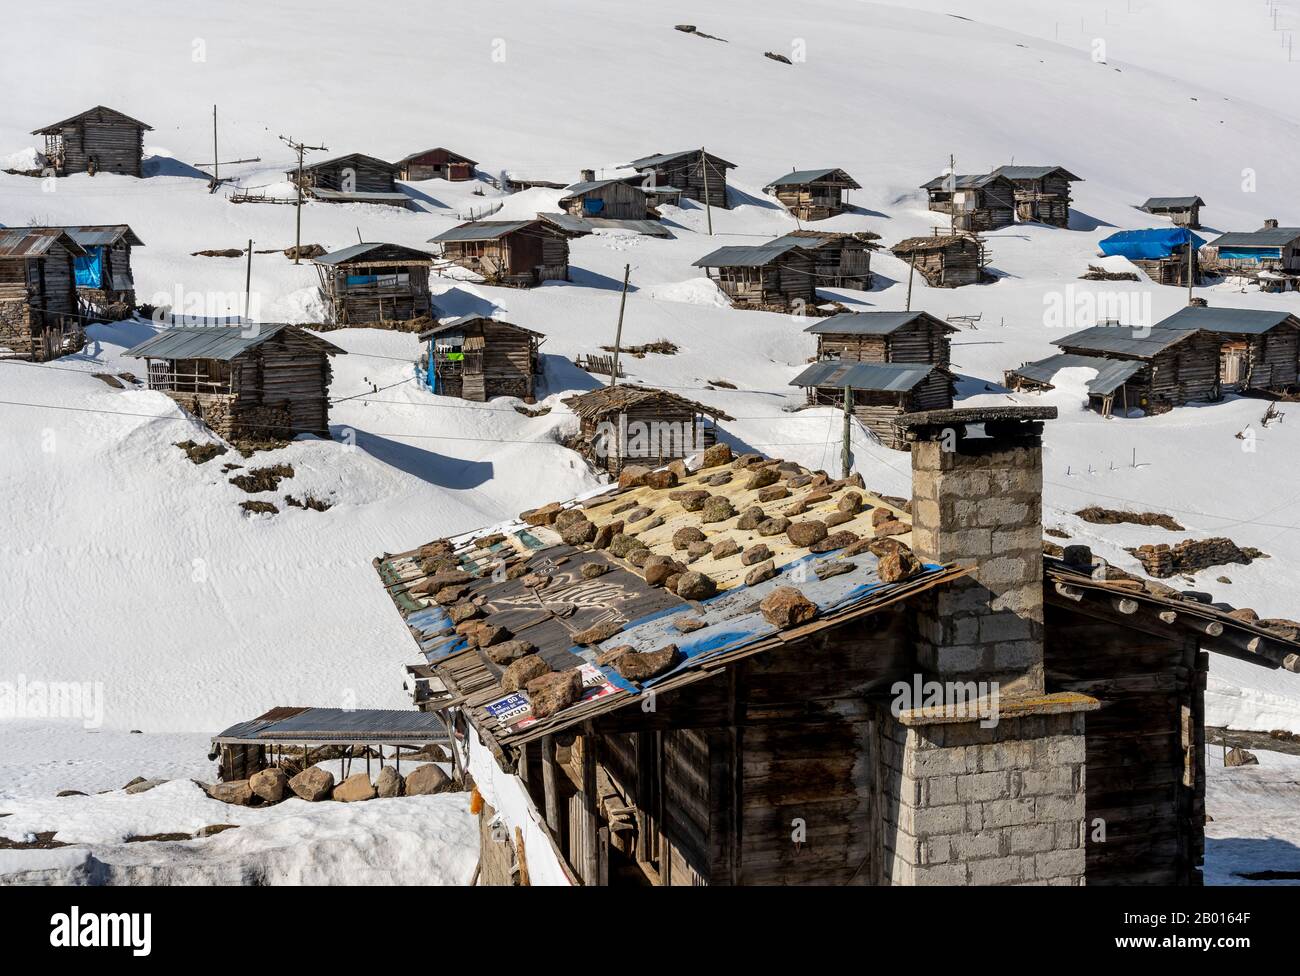 Koprulu, Turkey - May 9, 2019: Small village of Koprulu in the snow with wooden houses and cabins in a snowy valley in Turkey. Stock Photo